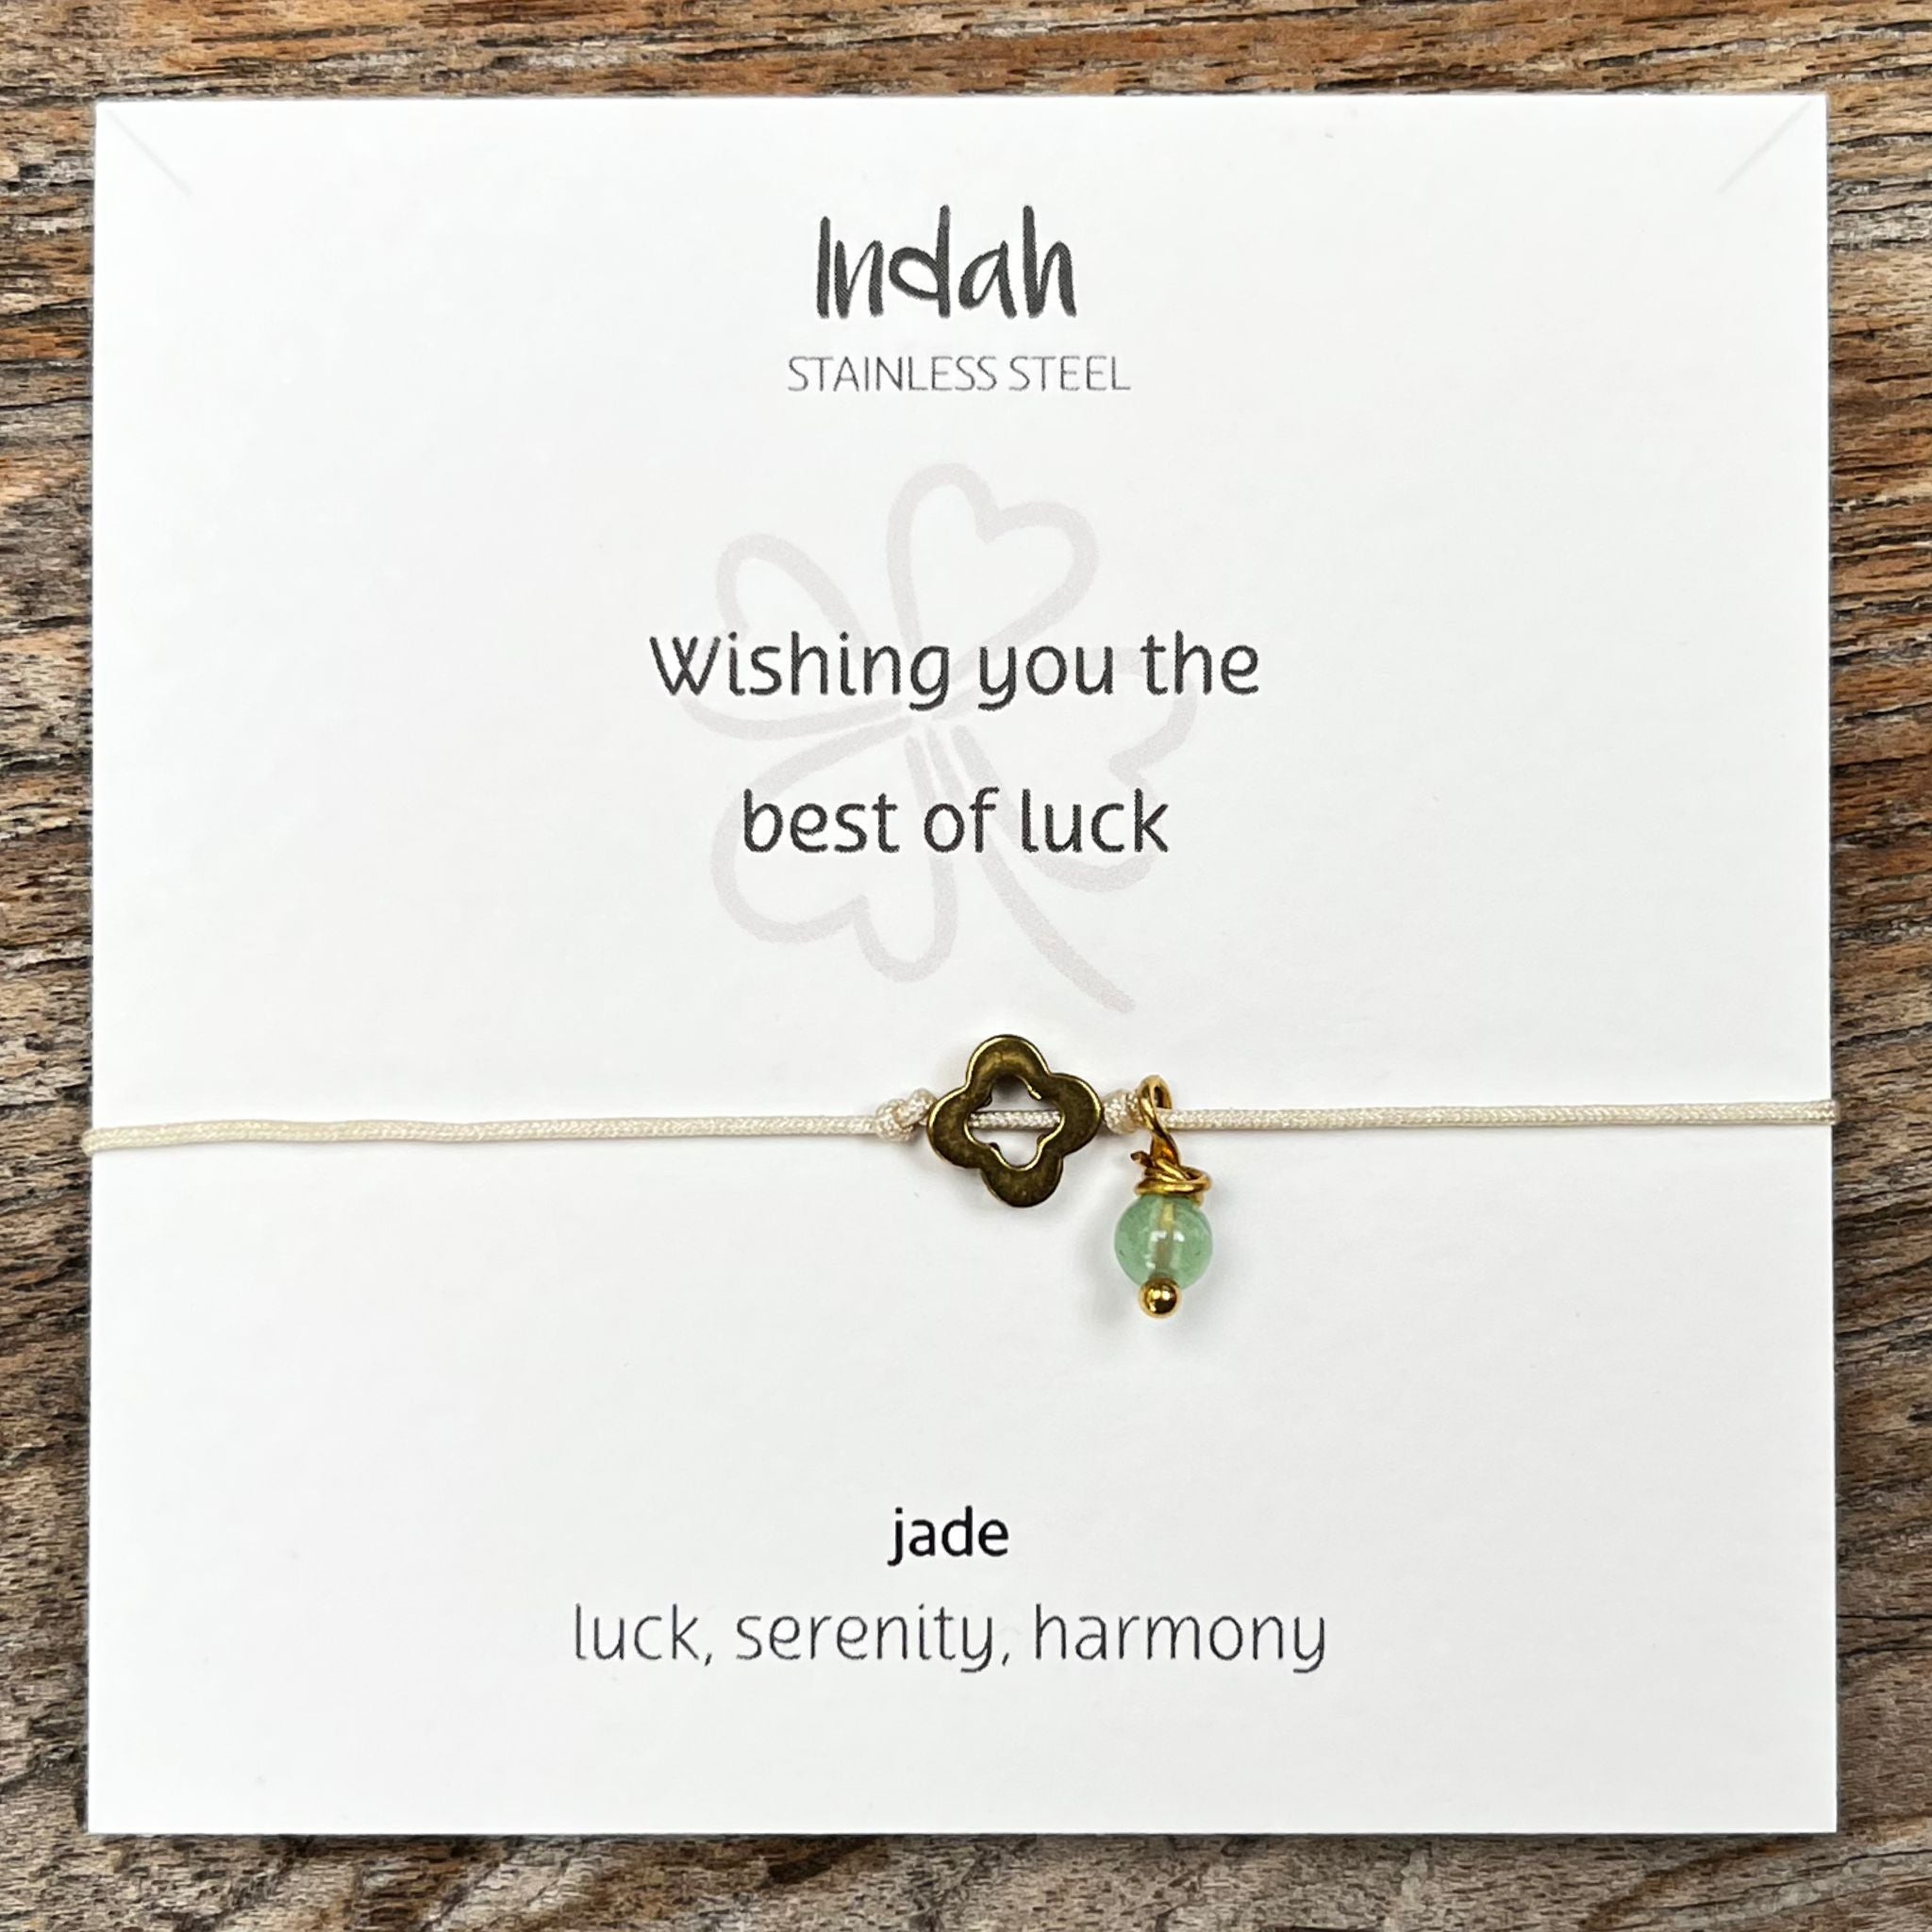 Wishing you the best of luck - Jade Gold